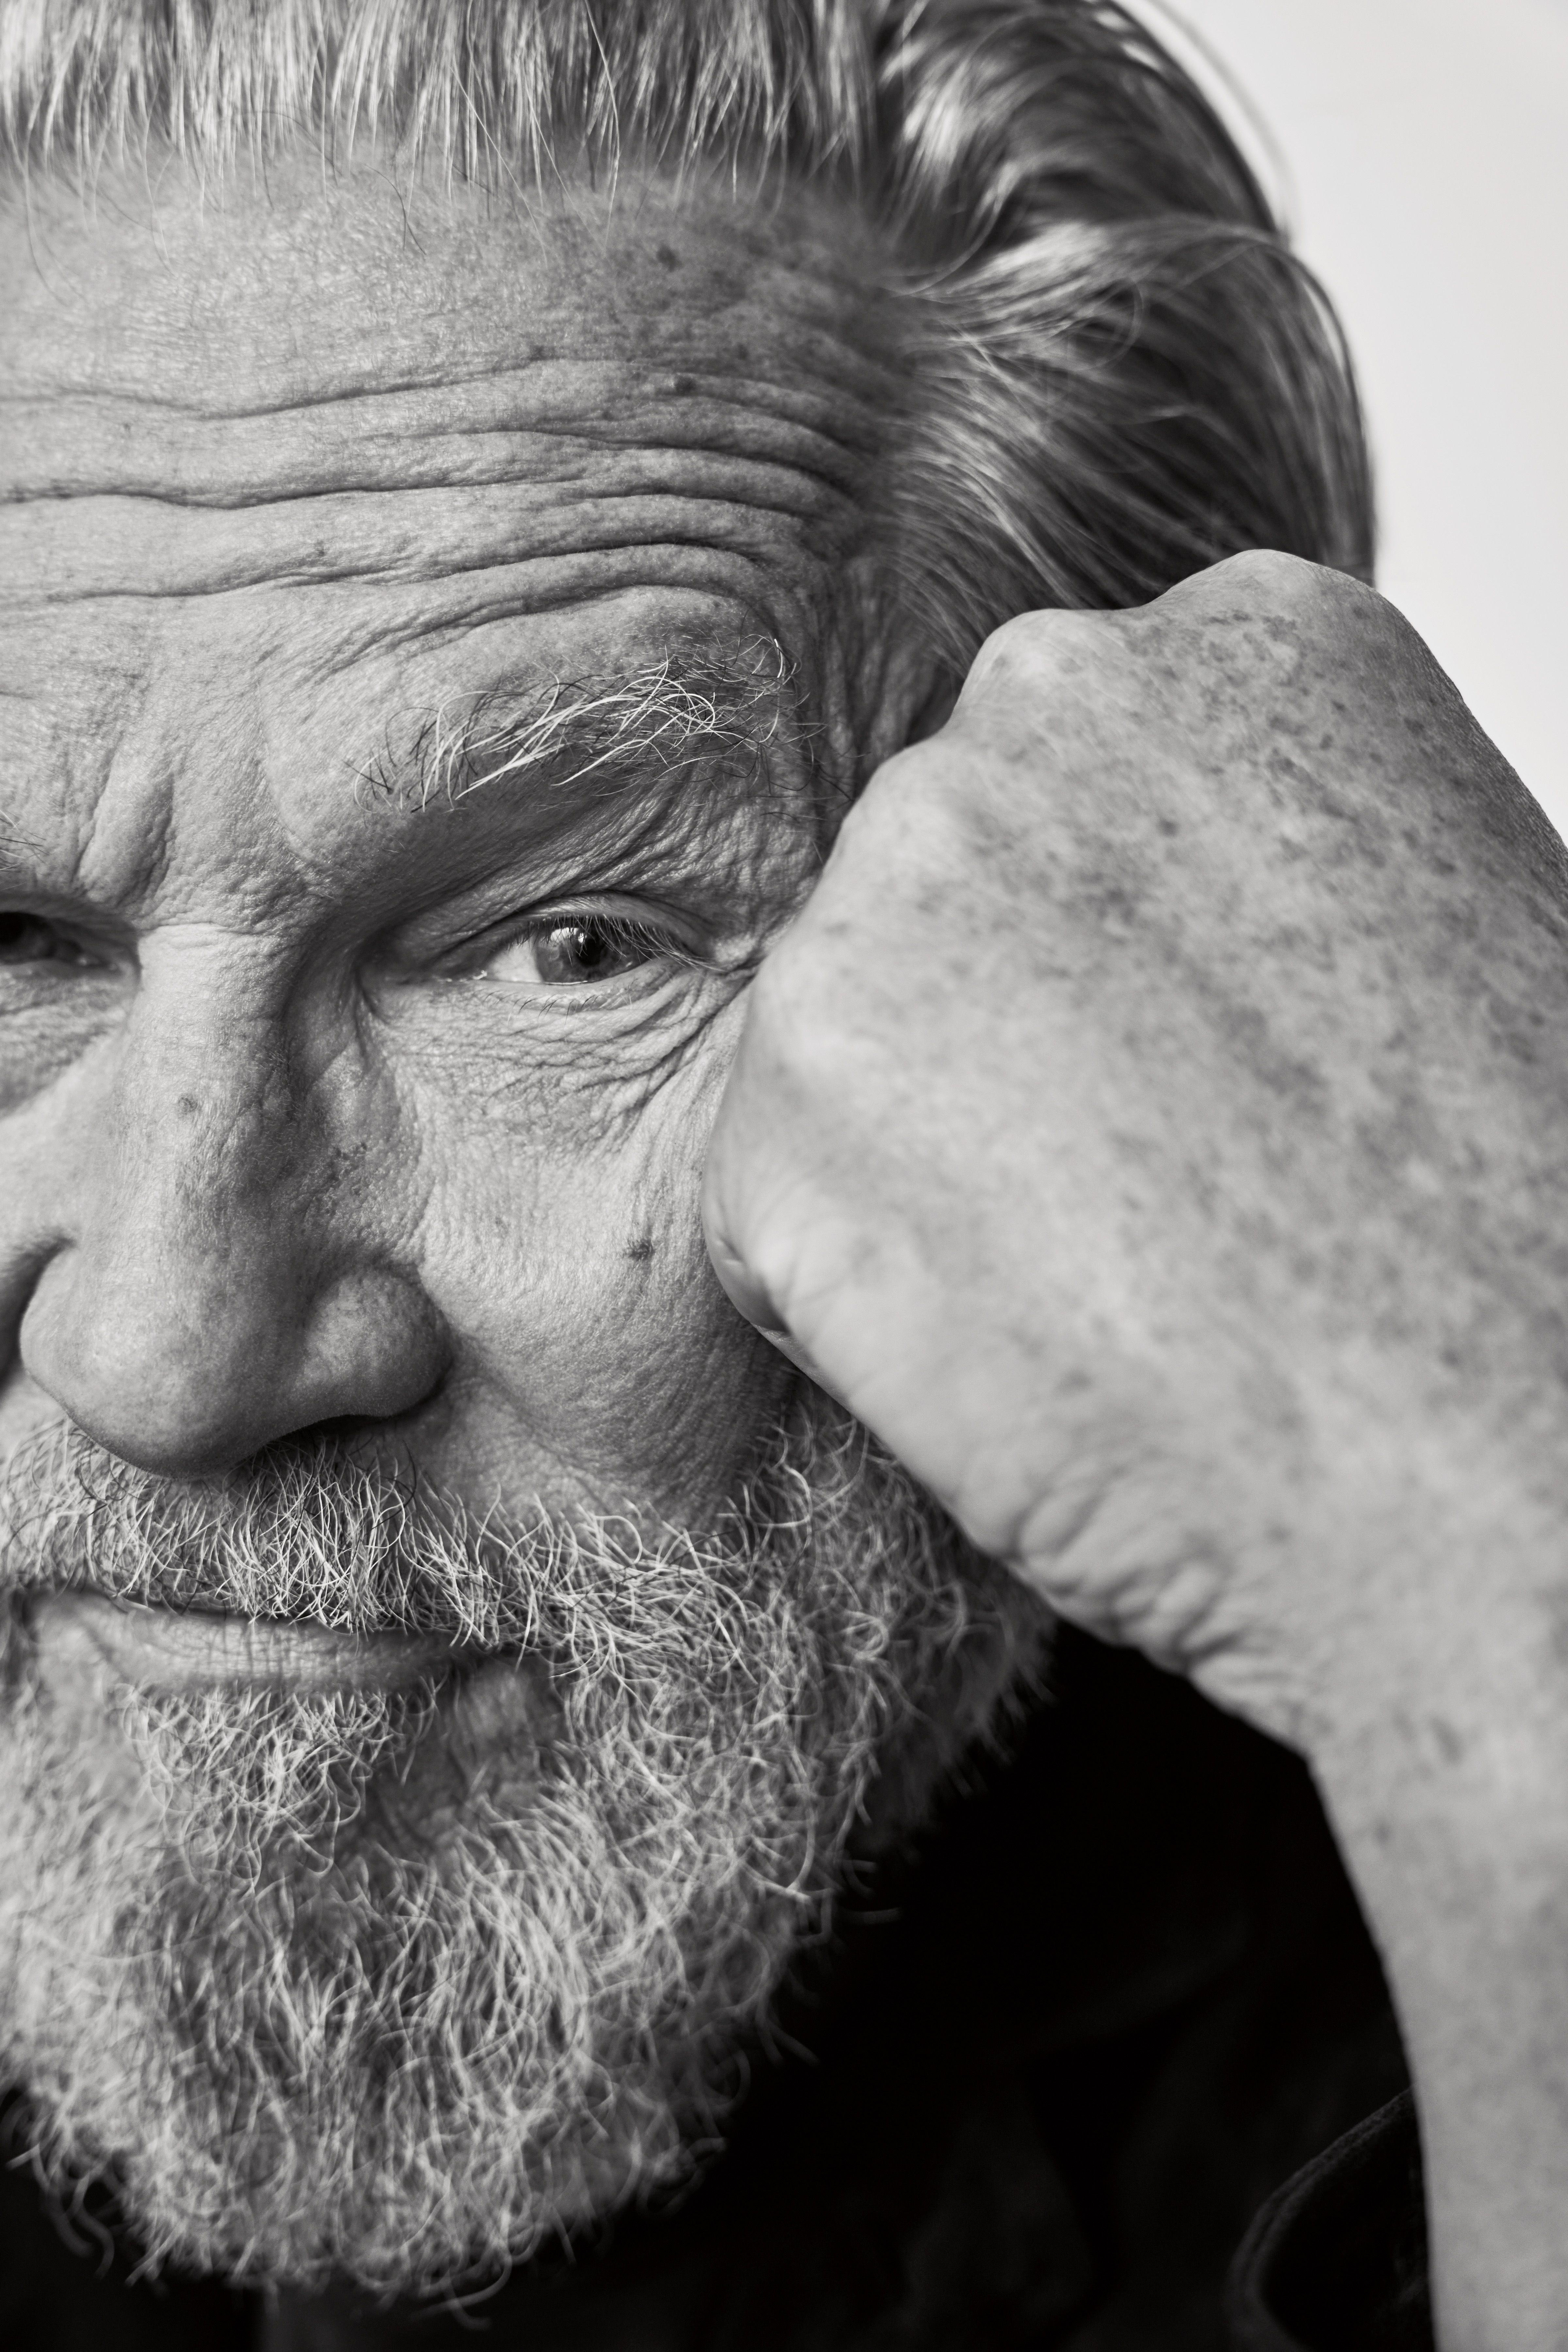 Jeff Bridges on Cancer, Covid, and His New Series The Old Man